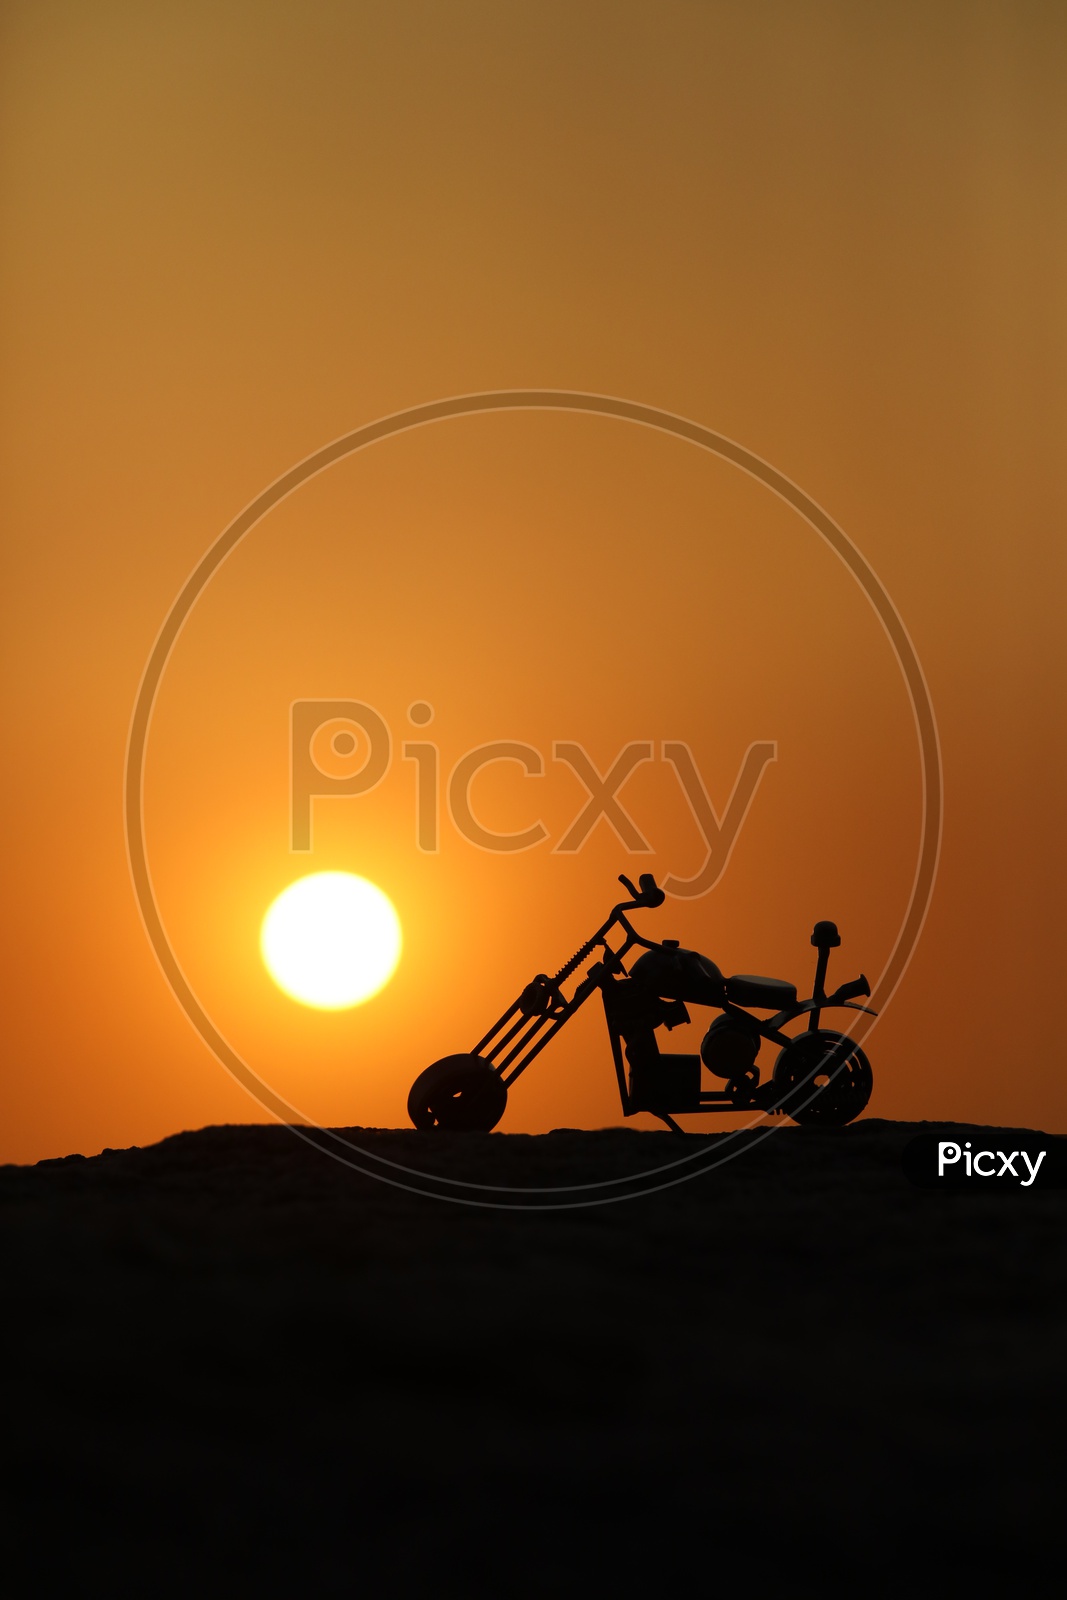 Toy Bike with Sunset in Background